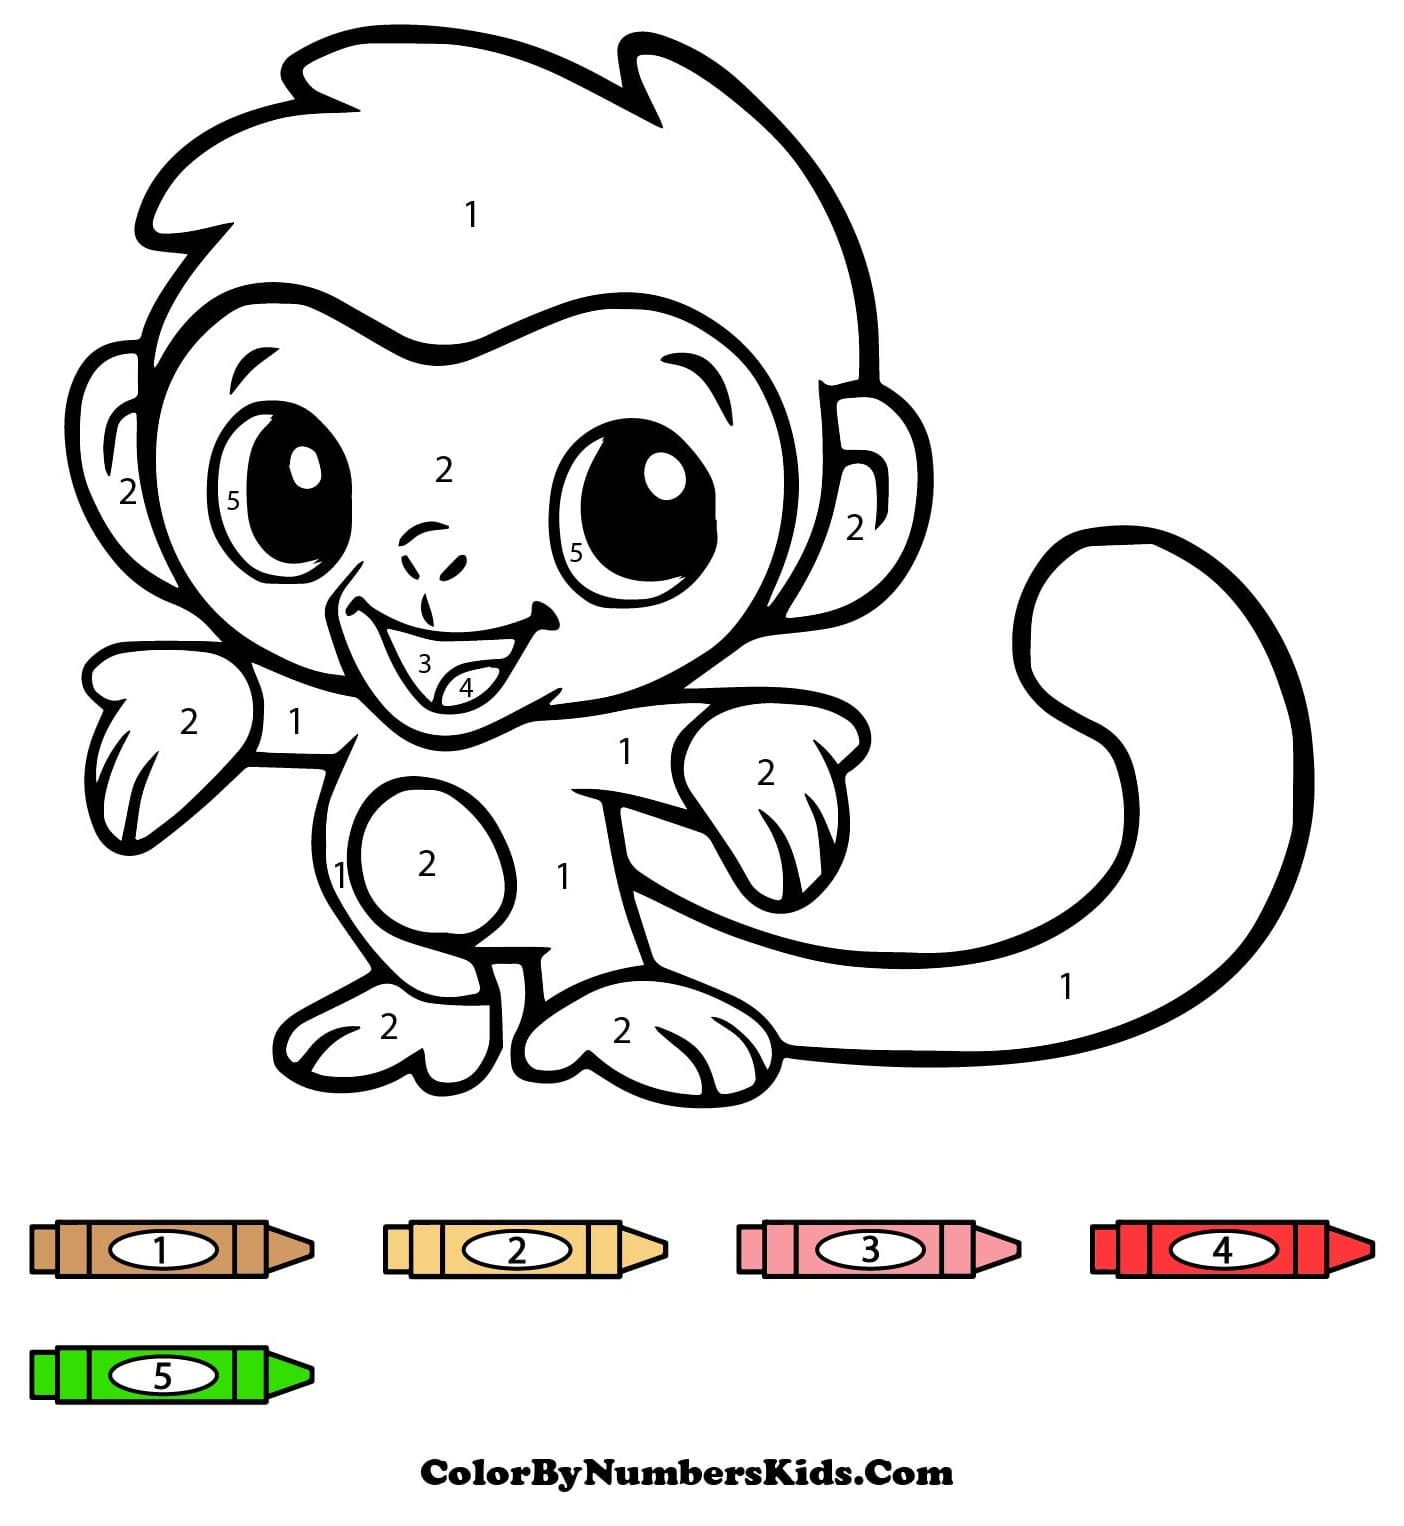 Cartoon Monkey Color By Number For Kids